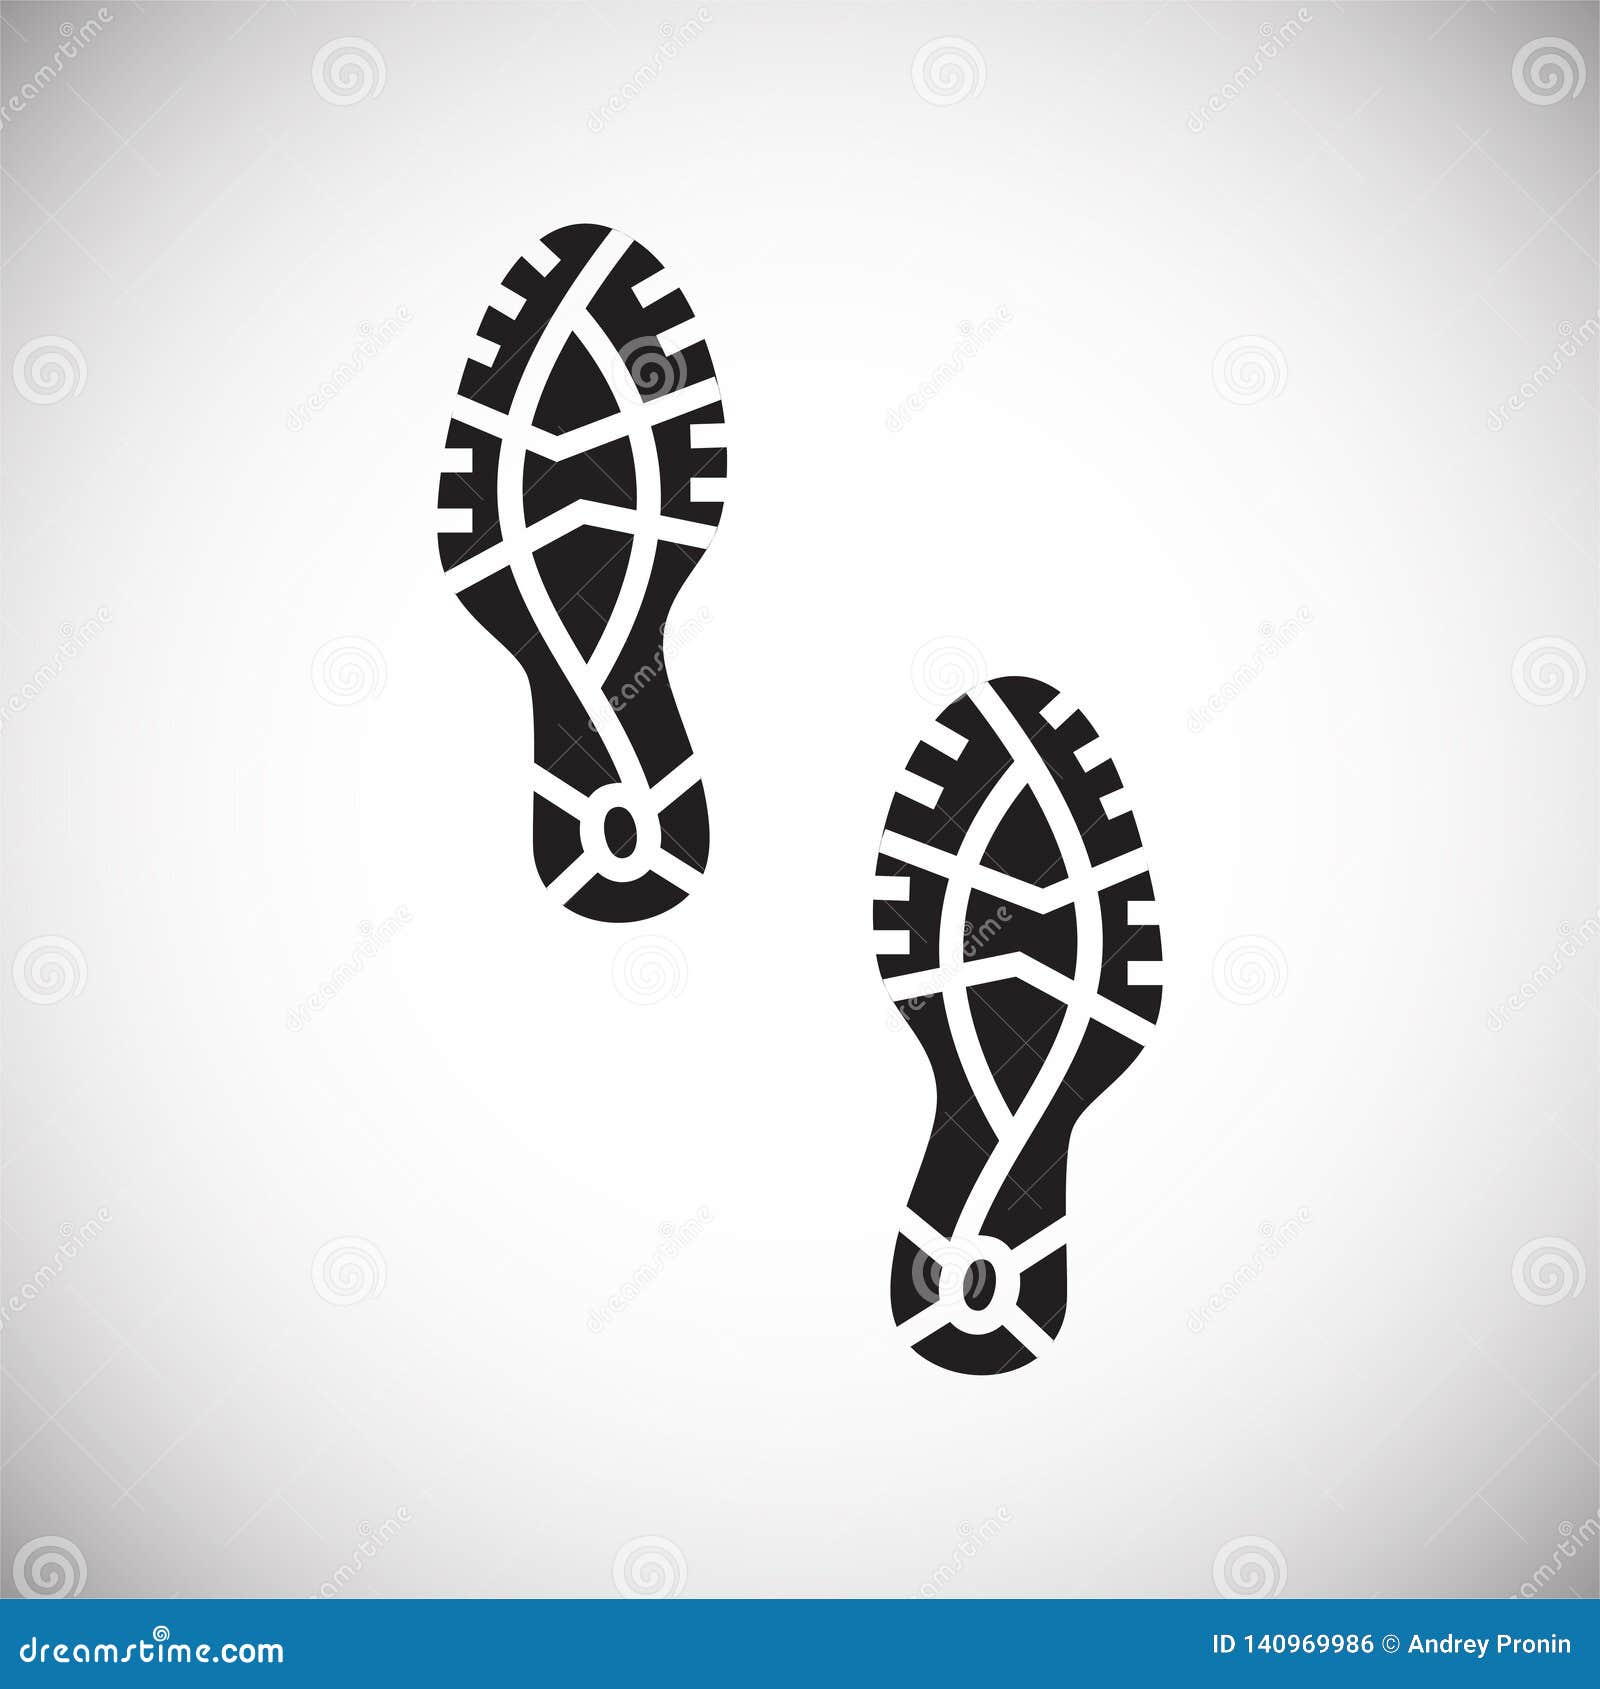 Footprint Icon On White Background For Graphic And Web Design